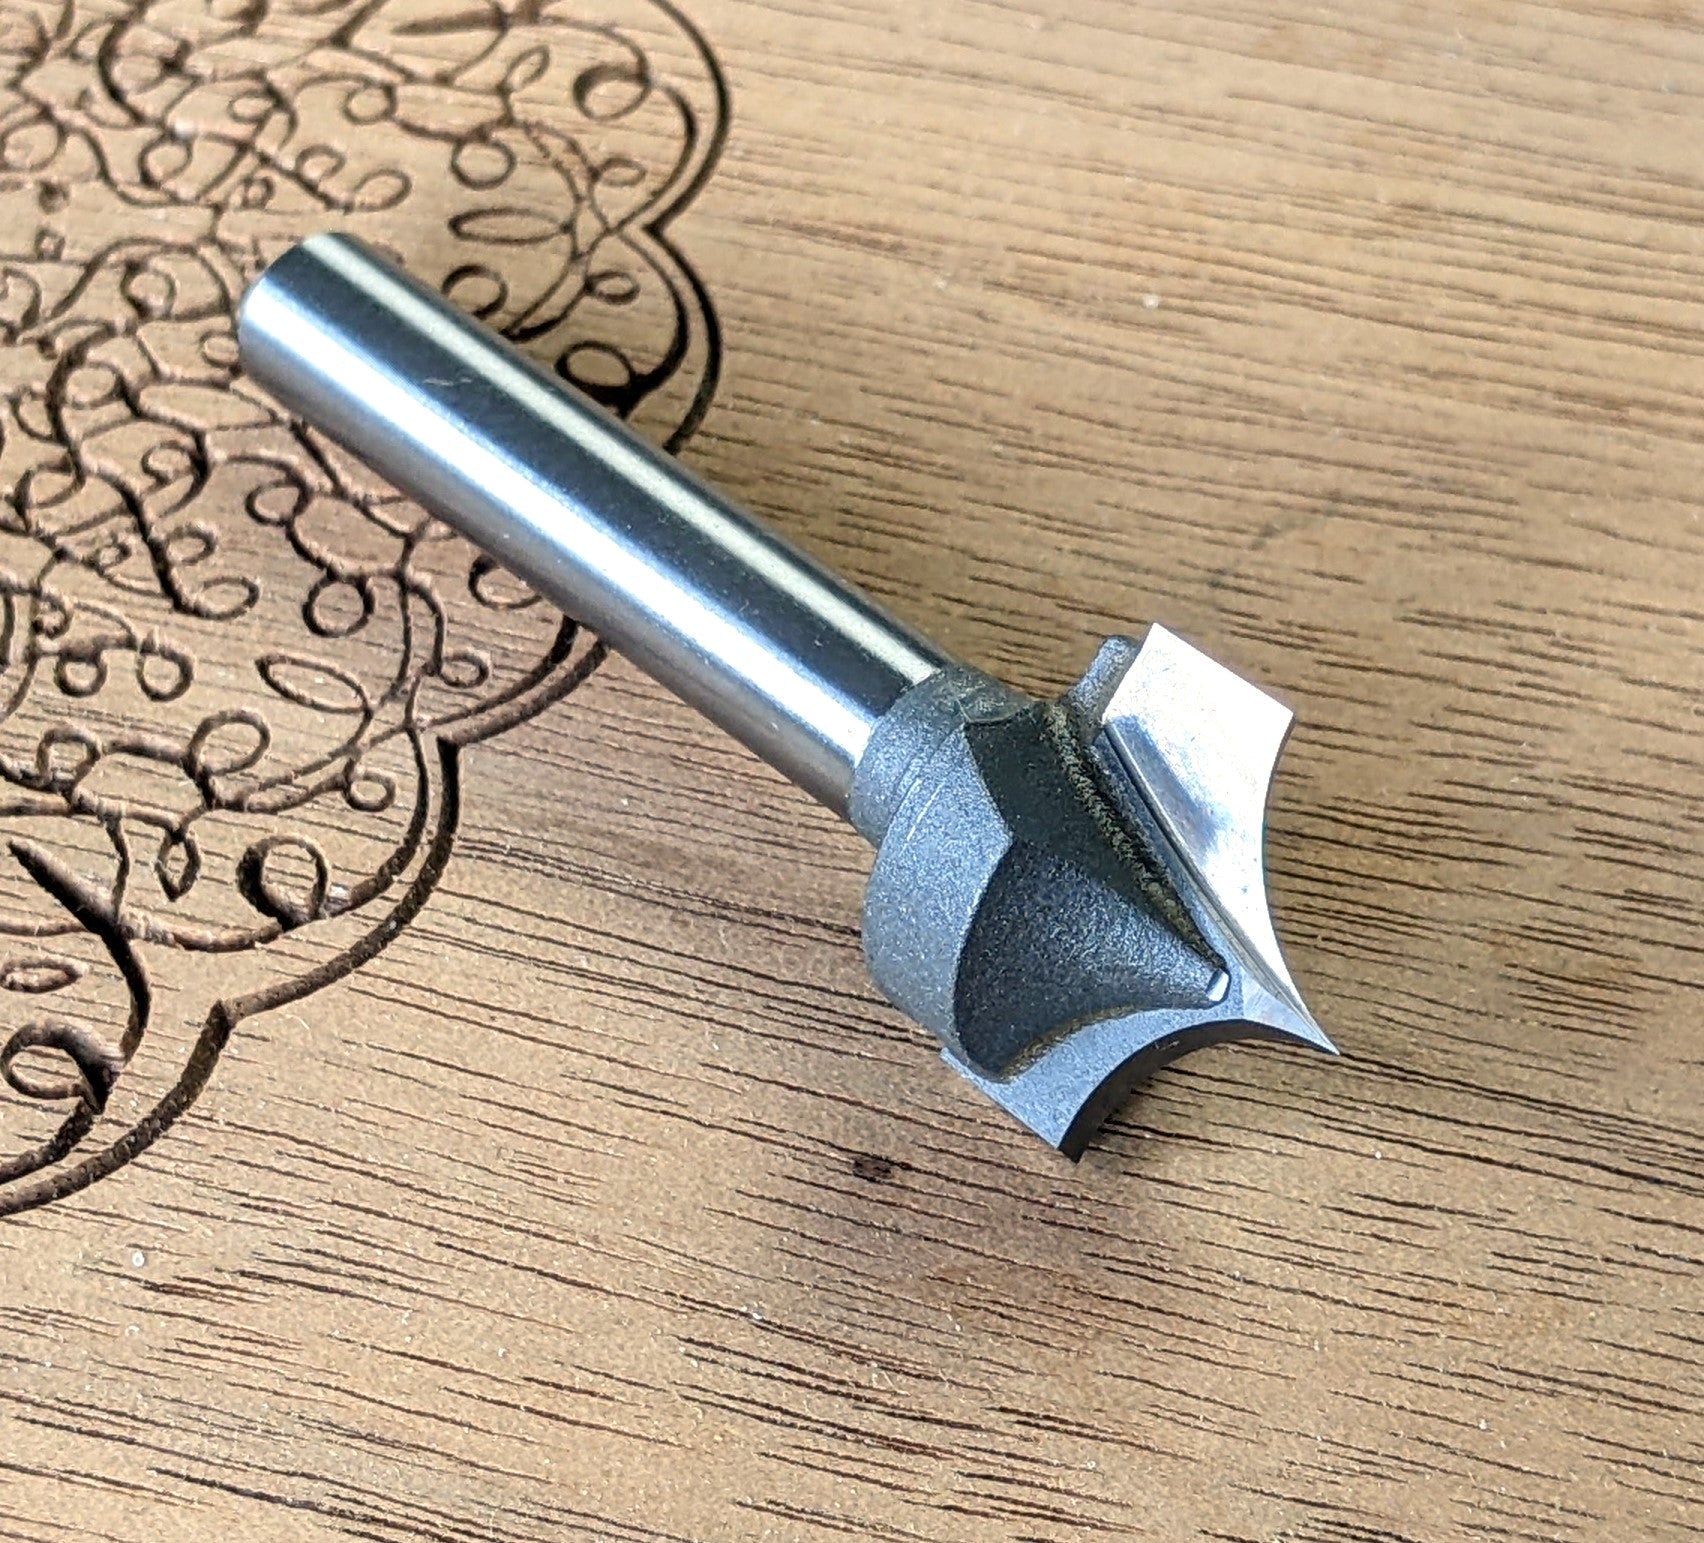 1/4" radius roundover bit for rounding cnc router projects